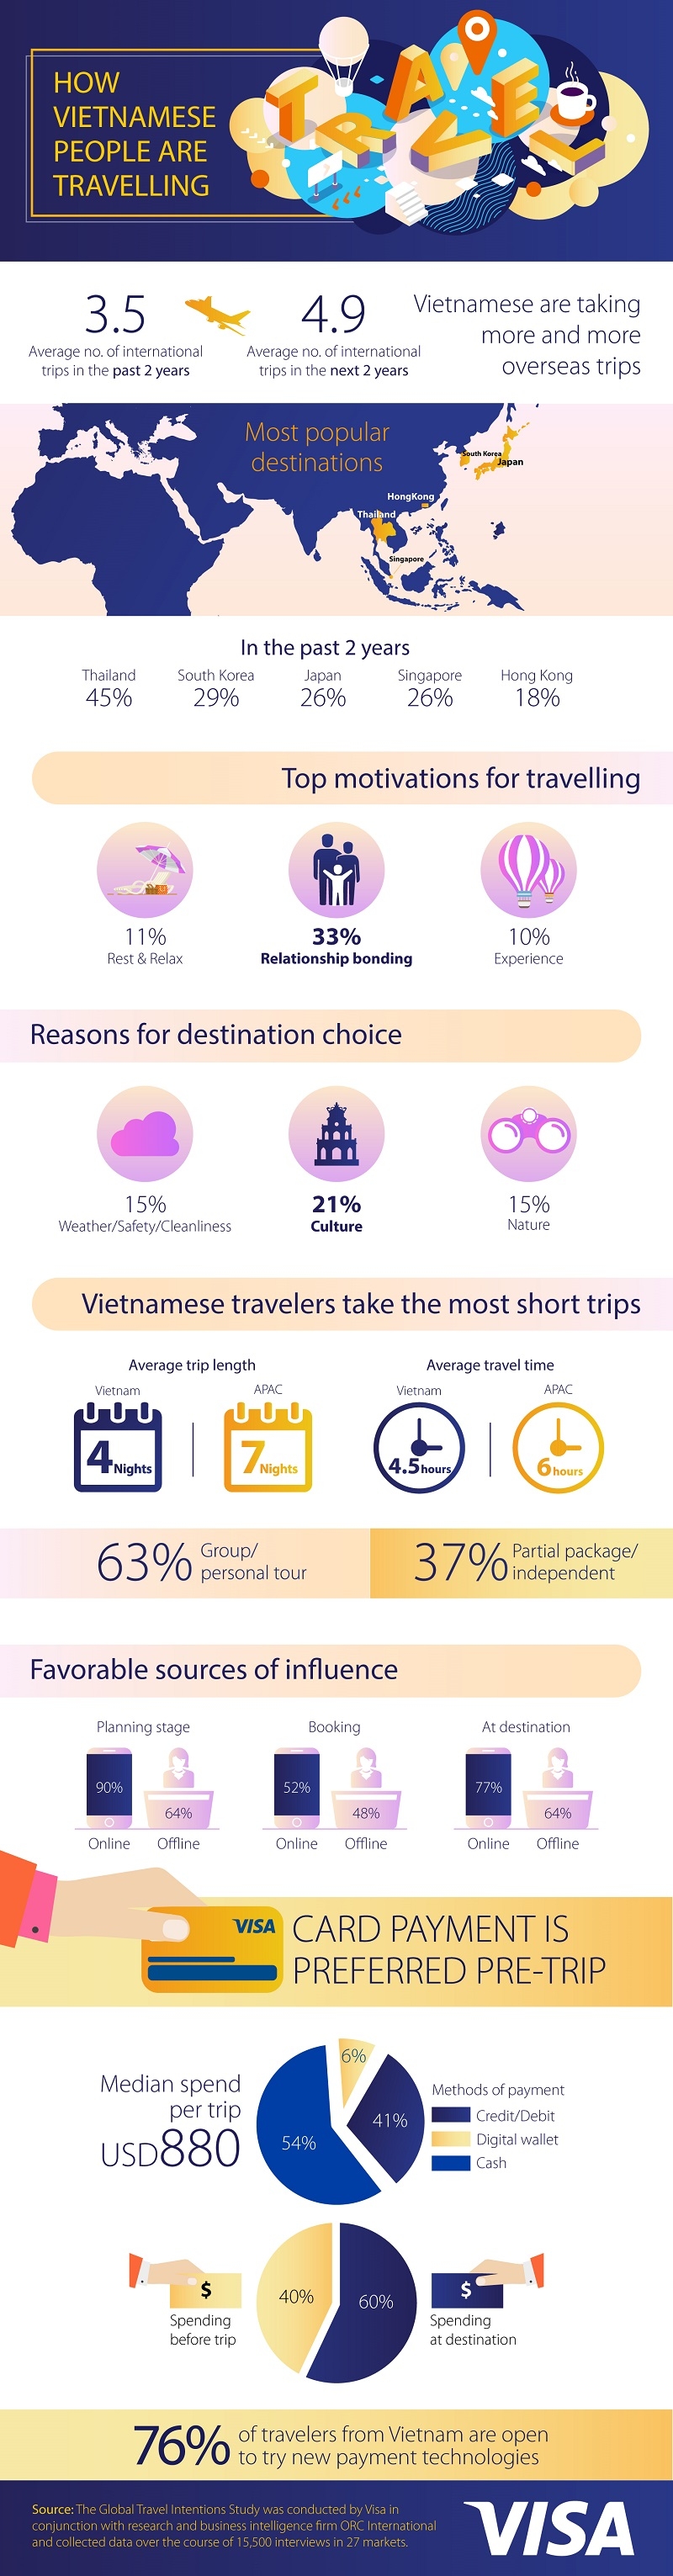 visa vietnamese people expected to travel and spend more